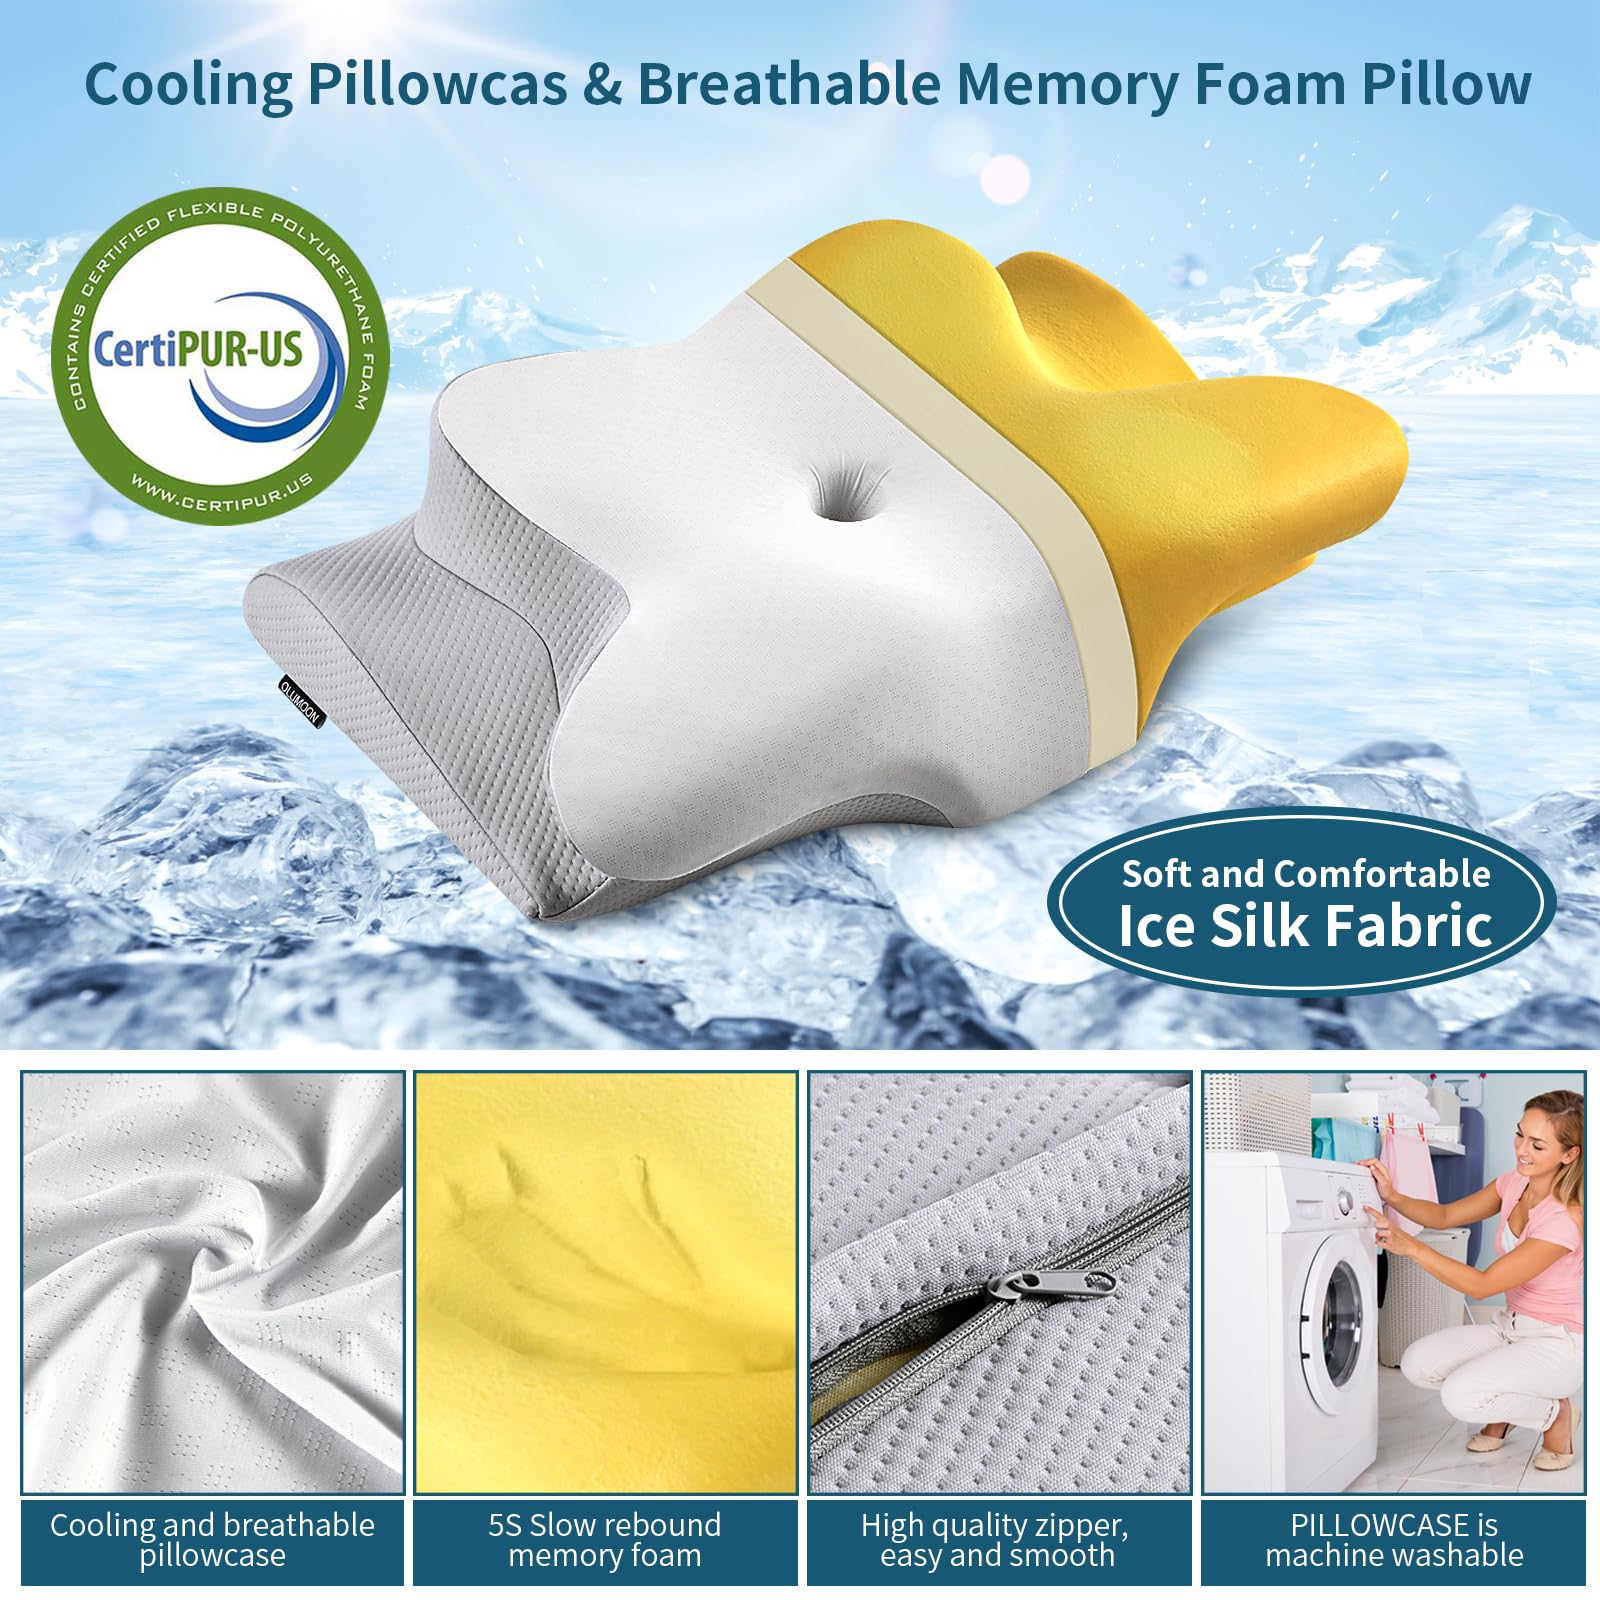 Neck Pillow Cervical Memory Foam Pillows for Pain Relief Sleeping, Ergonomic Pillow for Neck and Shoulder Pain, Orthopedic Contour Bed Pillow for Side, Back & Stomach Sleepers with Cooling Pillowcase